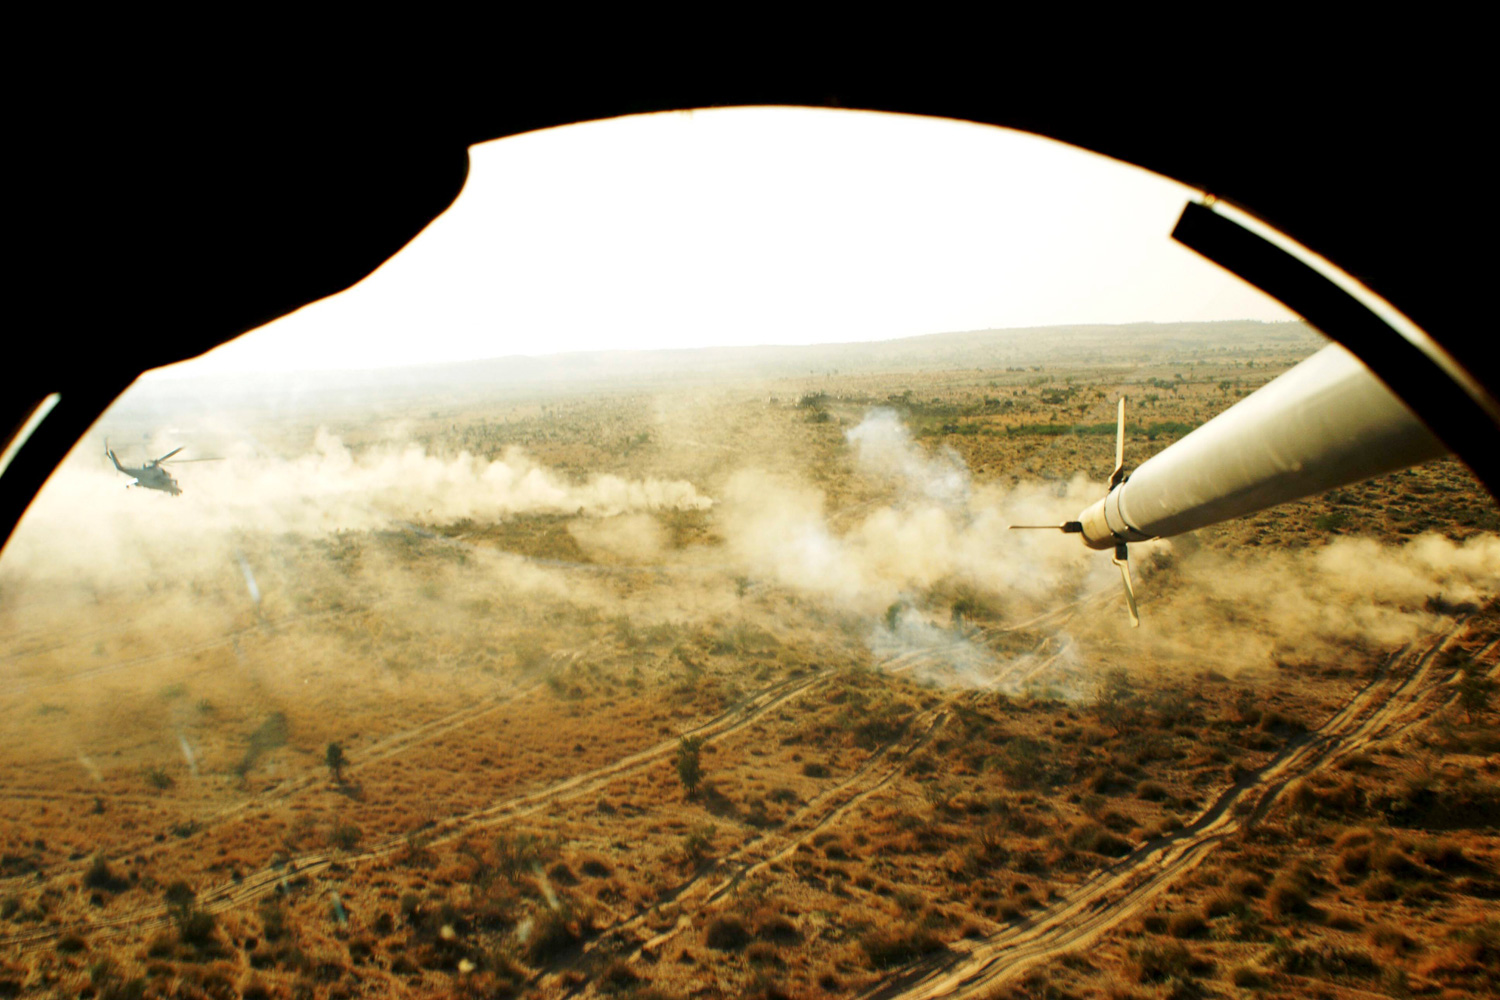 May 3, 2012. The view from the gunner's cockpit of an Indian Air Force Mi-35 attack helicopter is pictured during the Shoor Veer military exercise near Hanumangarh, located near the India-Pakistan border.